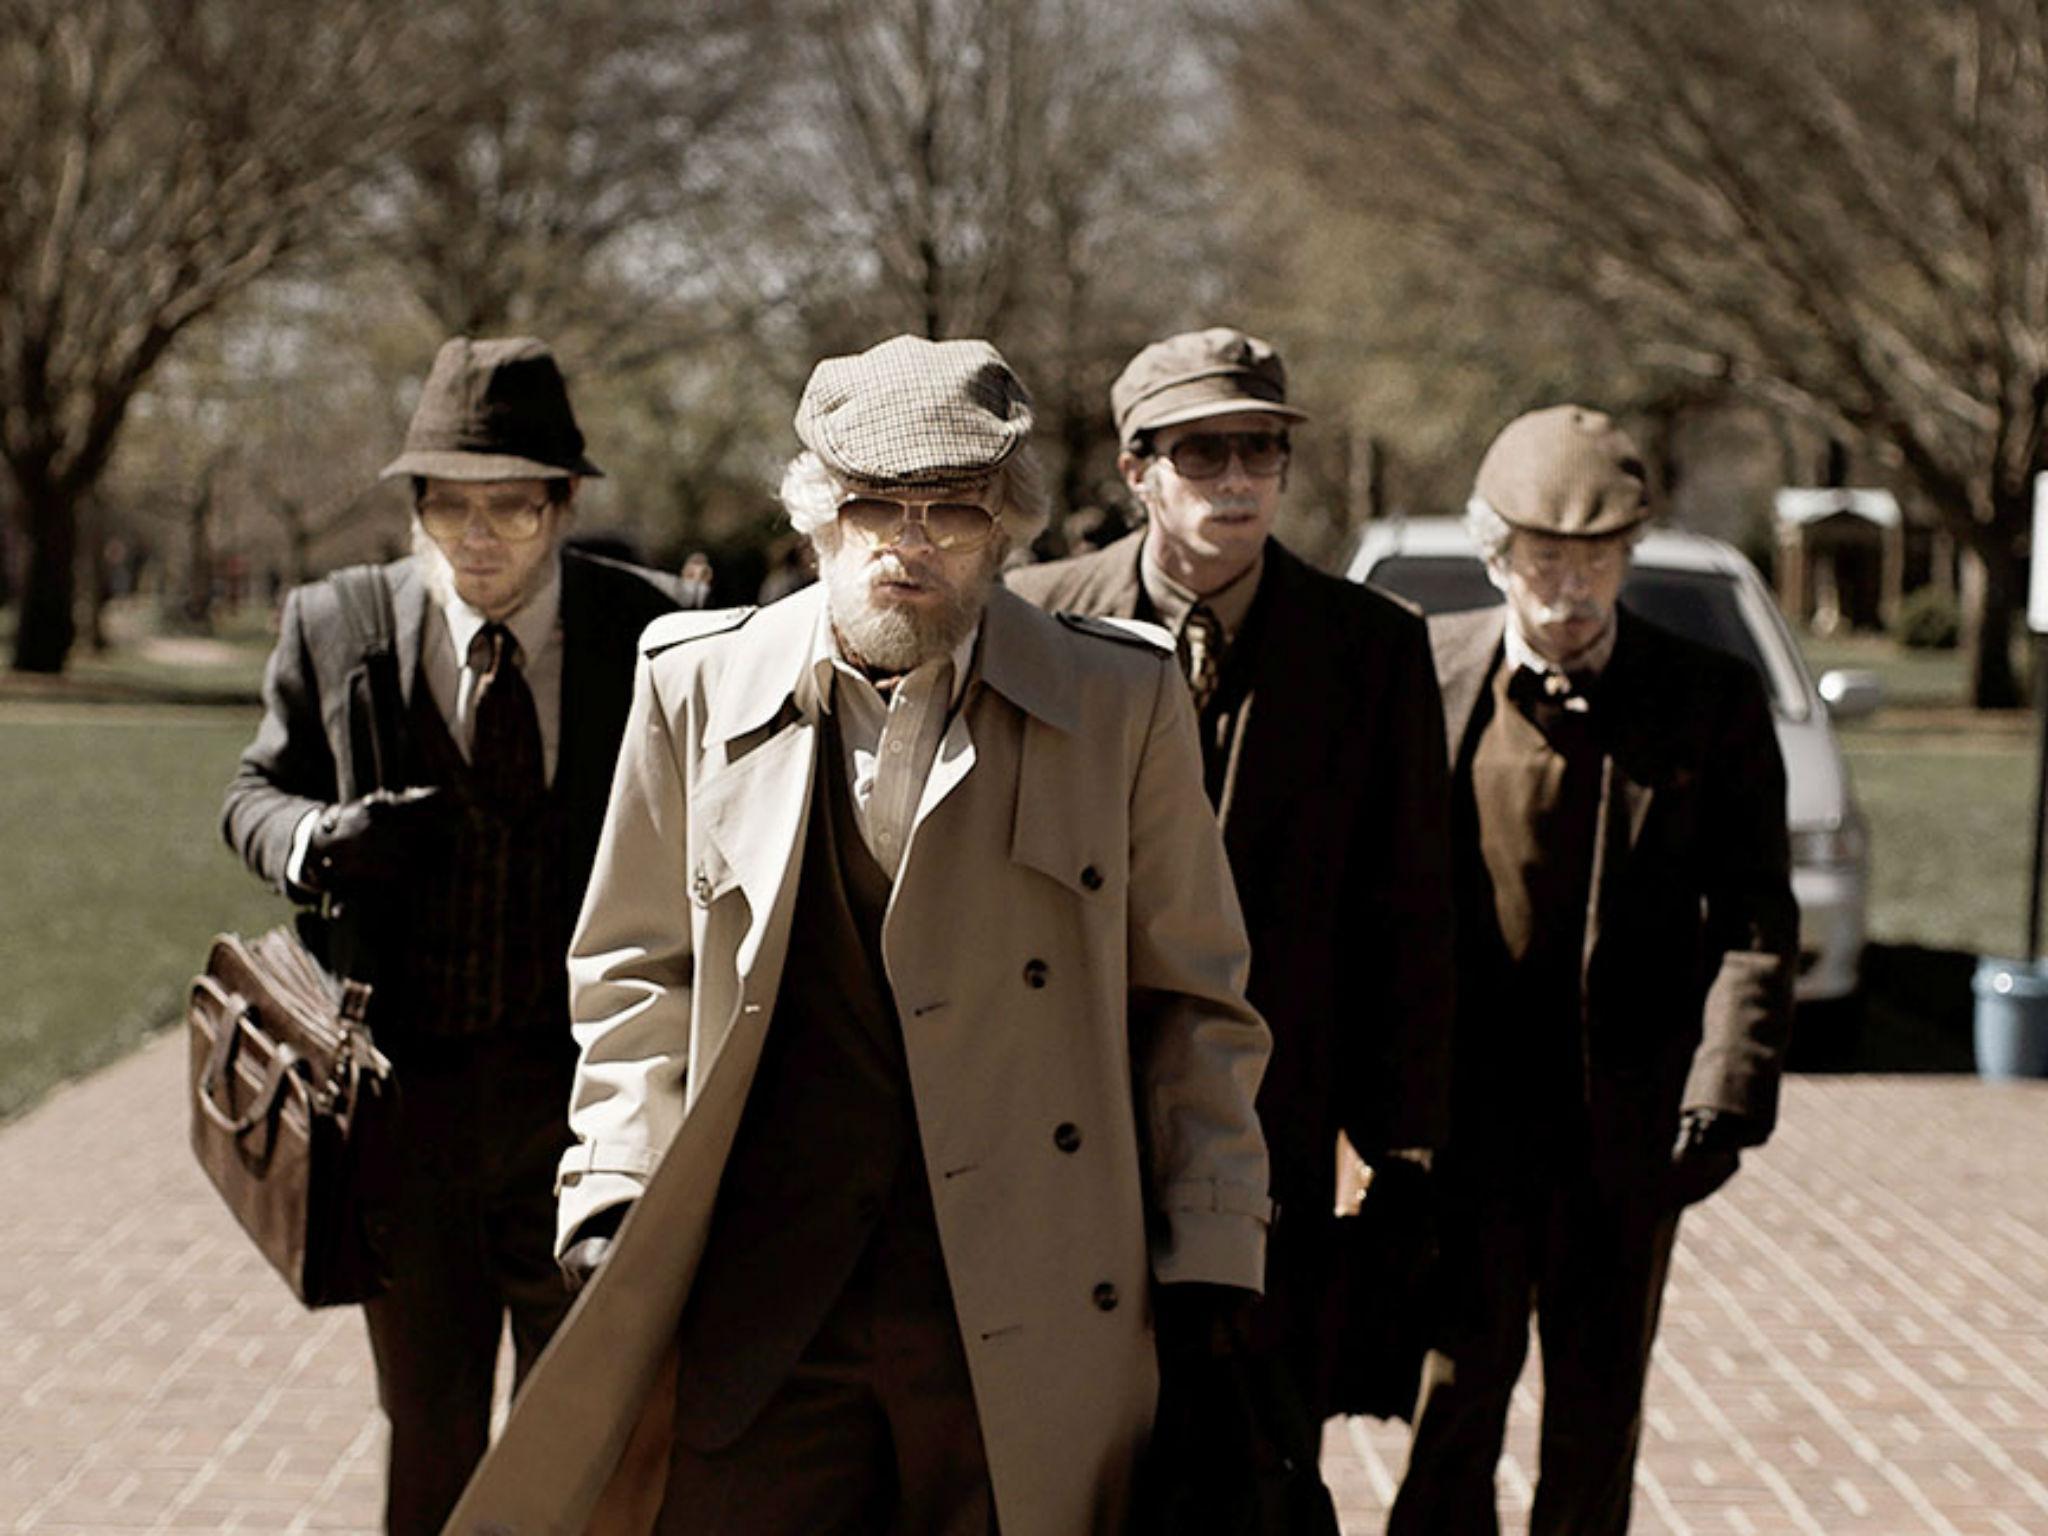 True story: in 'American Animals' thieves make off with a $750,000 haul